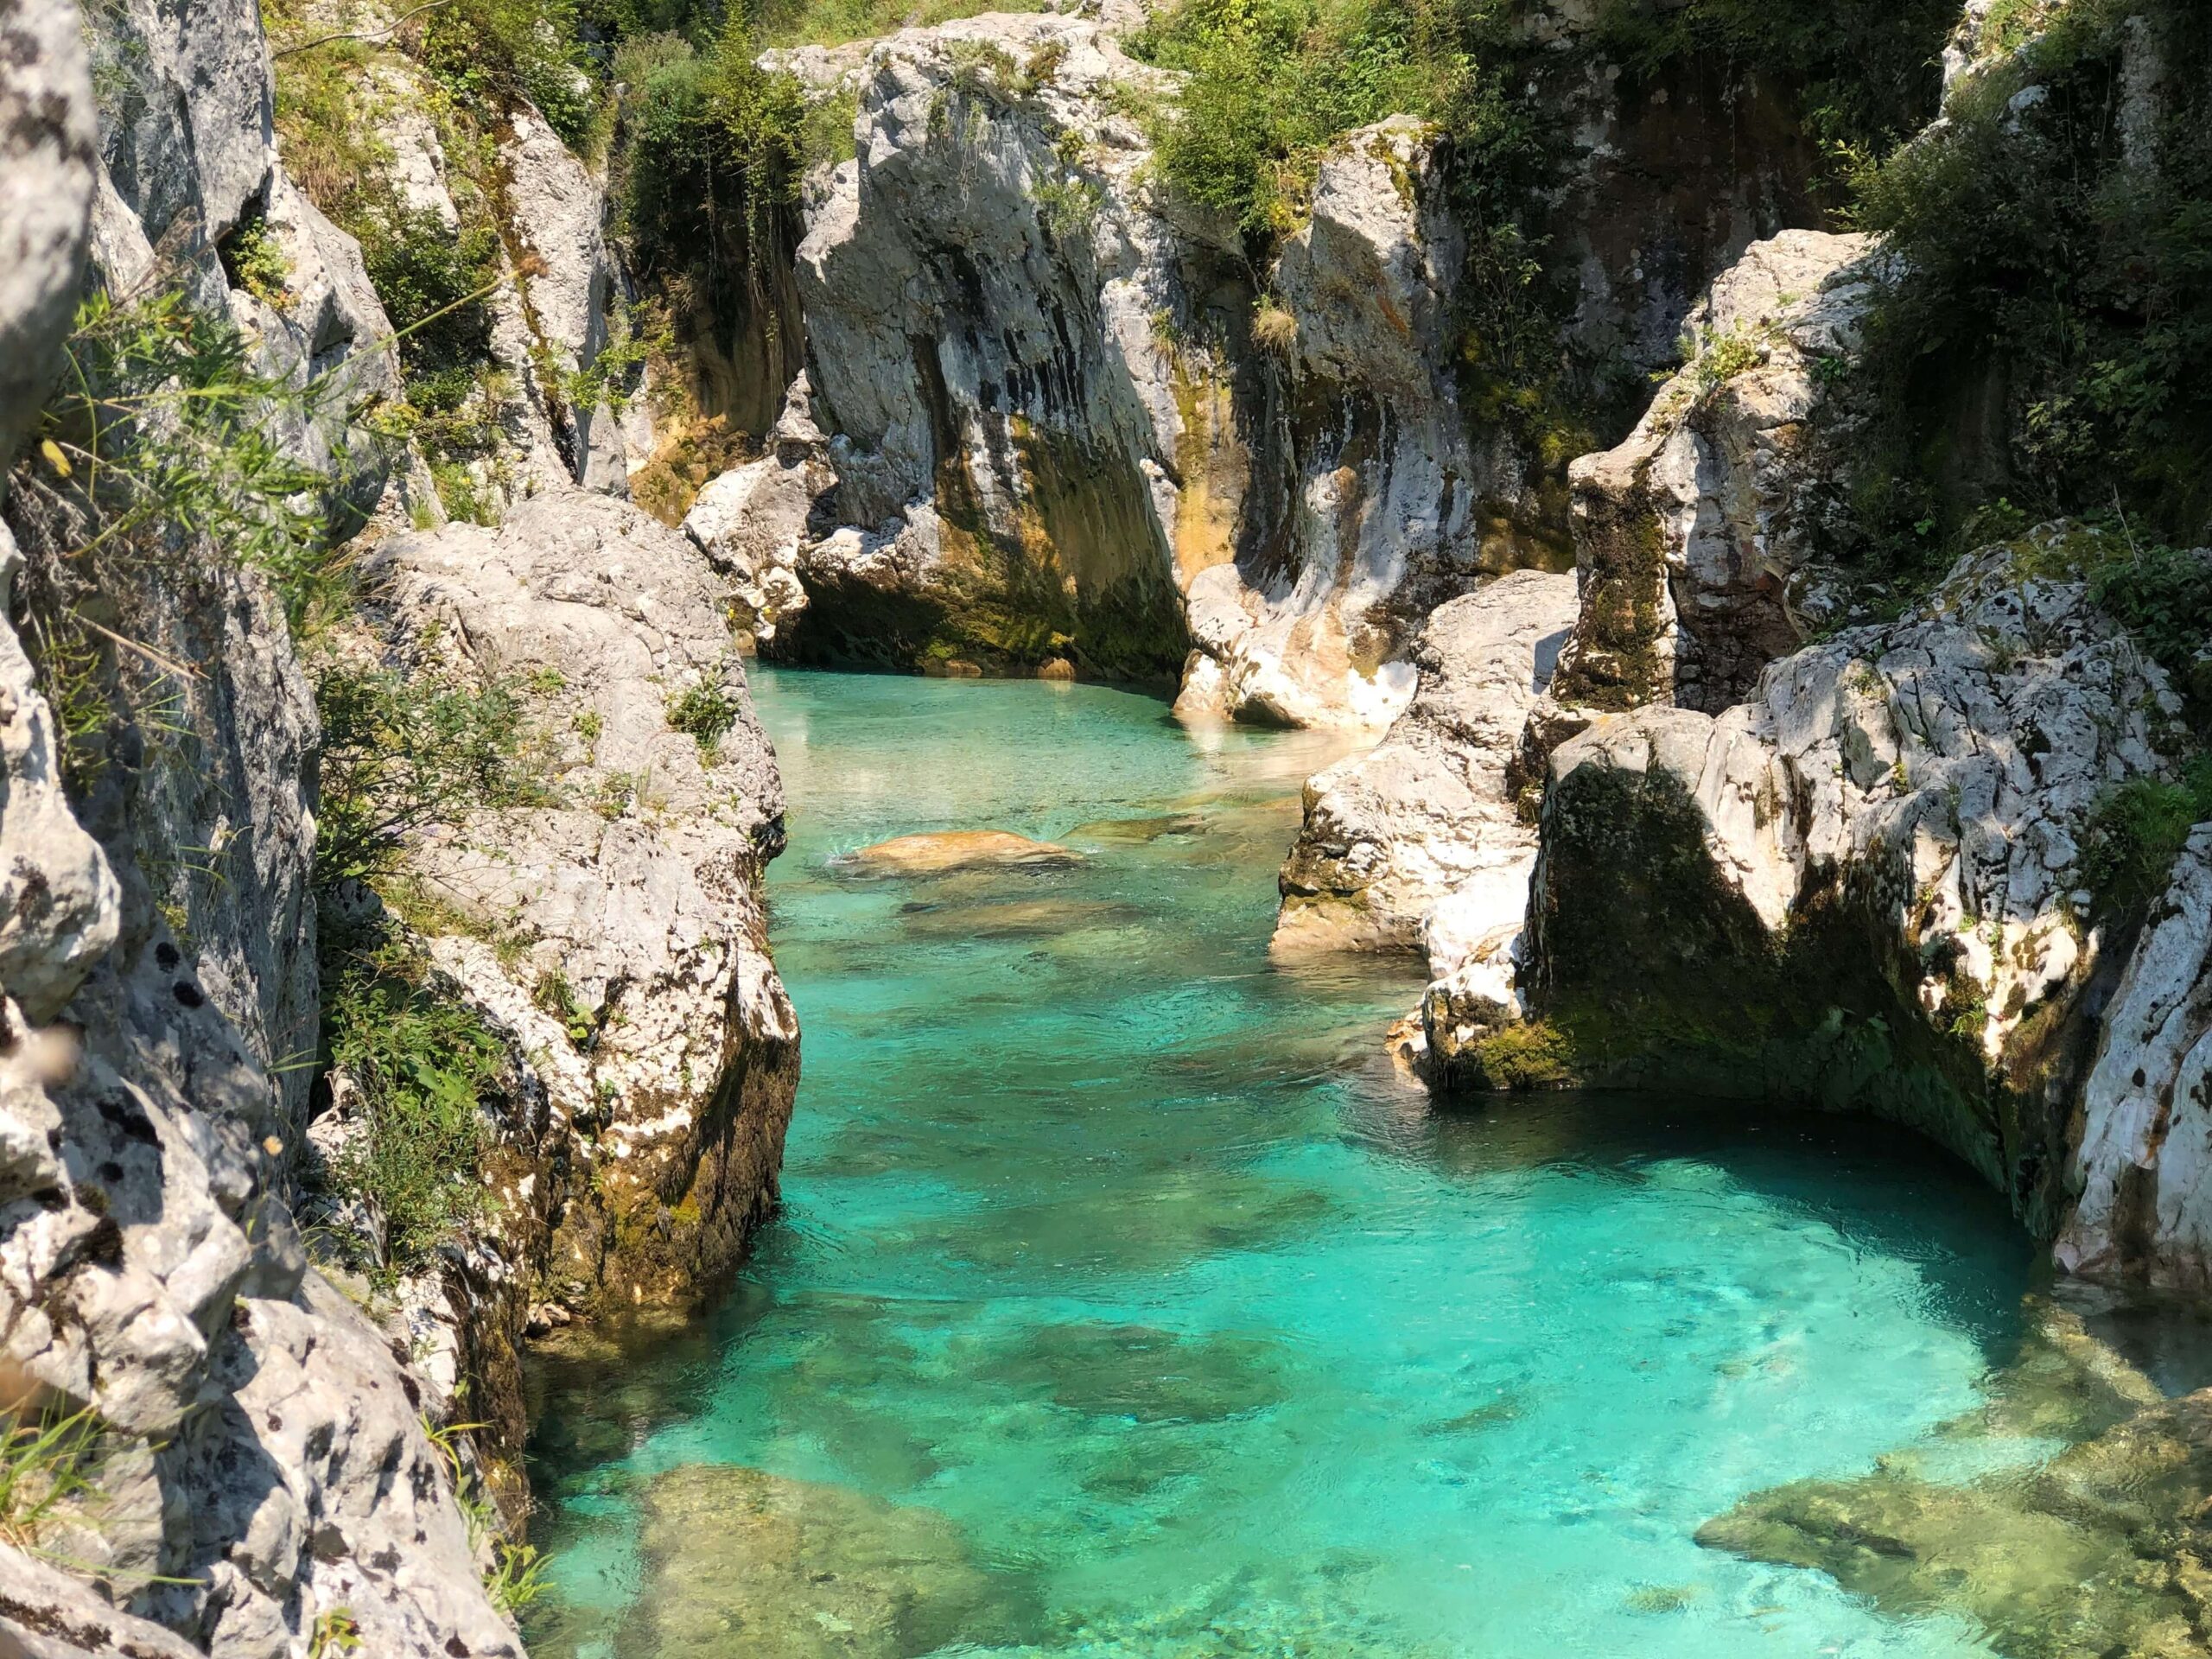 Turquoise Soca River flowing through the Great Soca Gorge